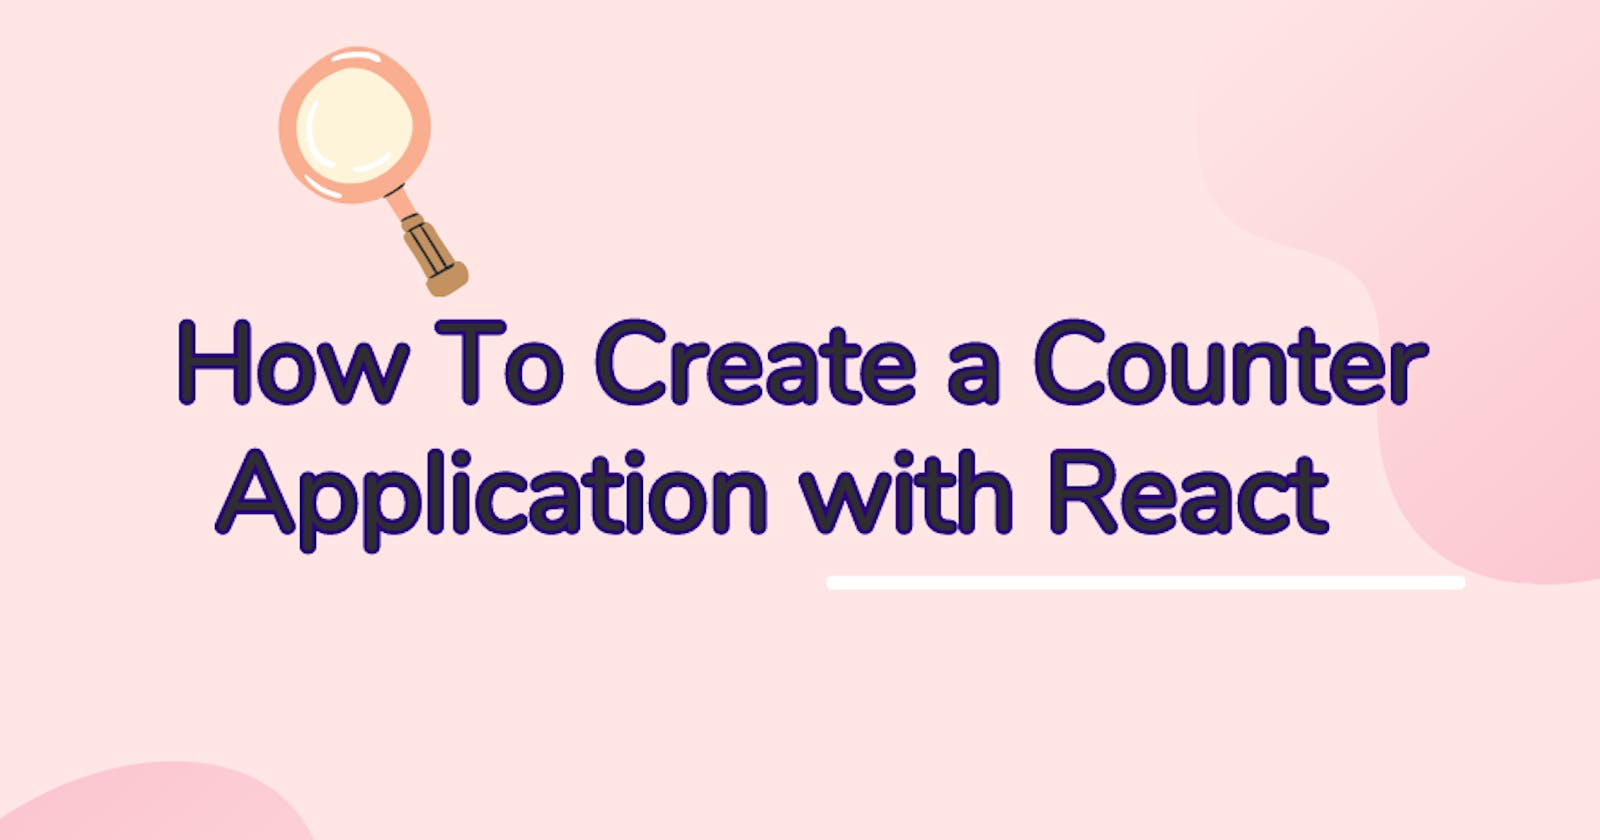 How To Create a Counter Application with React